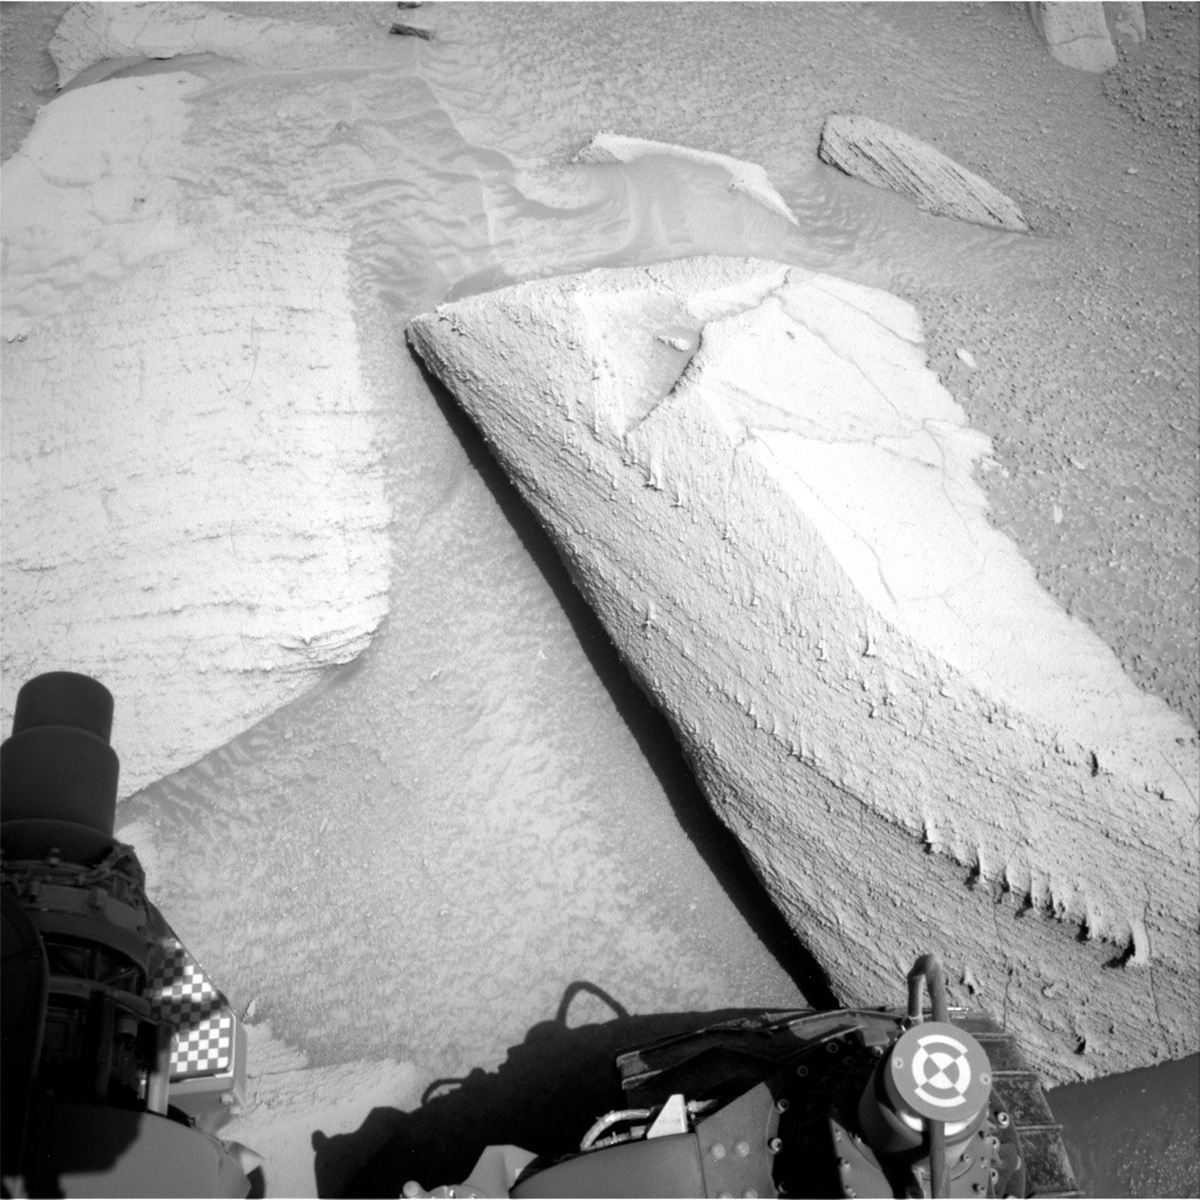 This image of the Martian rock Cupixi and a rock with a "shark's teeth" formation nearby, with the Curiosity rover visible at the edge of the image, was taken by the Curiosity rover on Sol 3797.